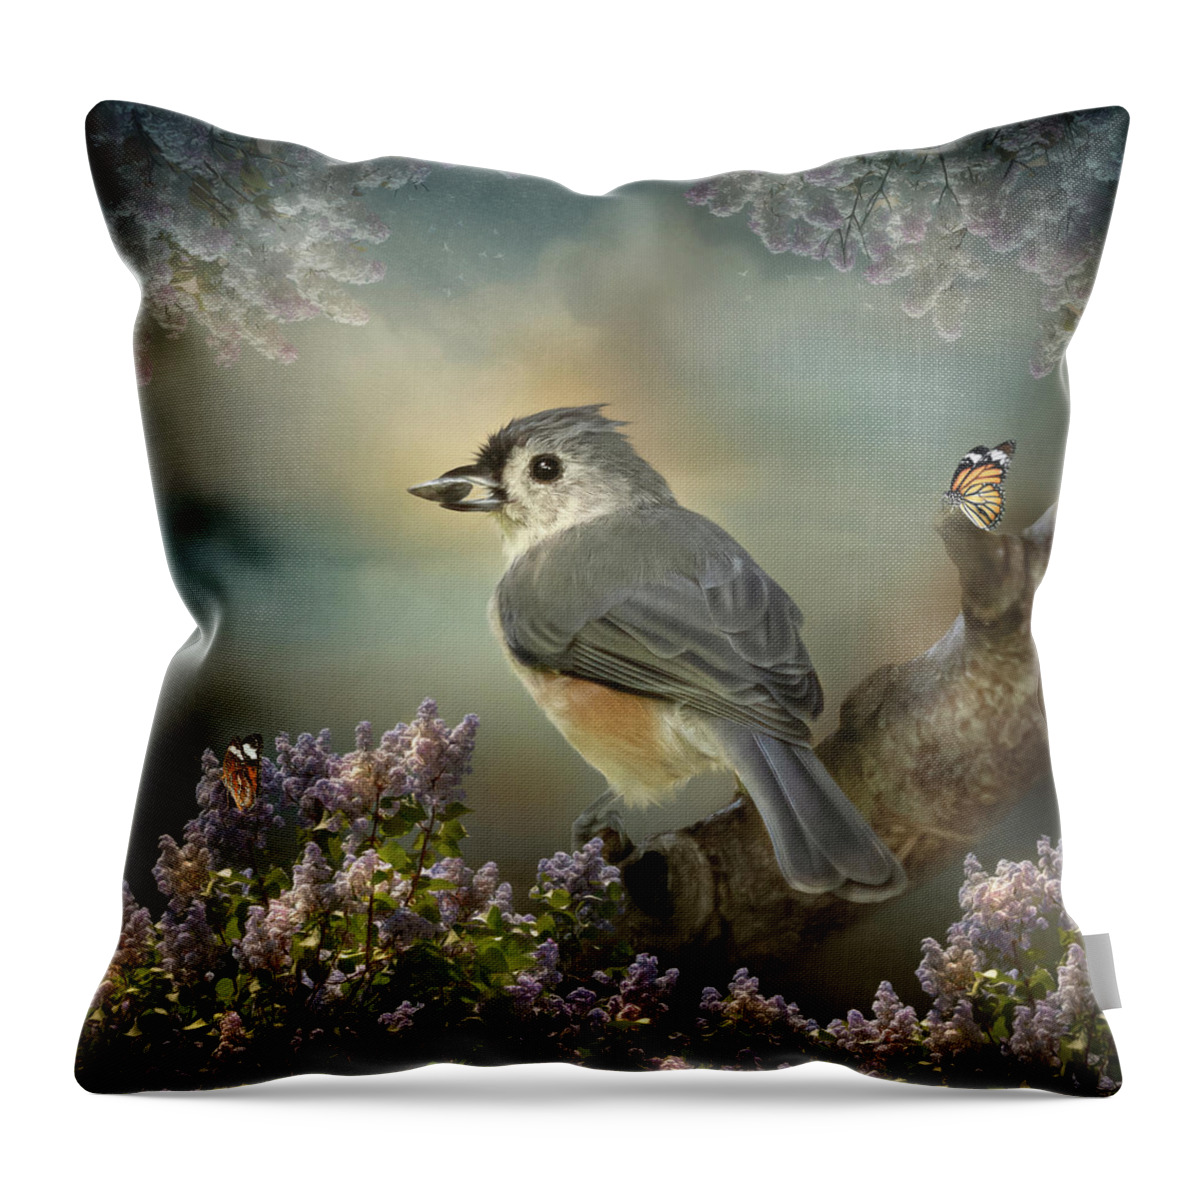 Birds Throw Pillow featuring the digital art Tomas the Titmouse by Maggy Pease